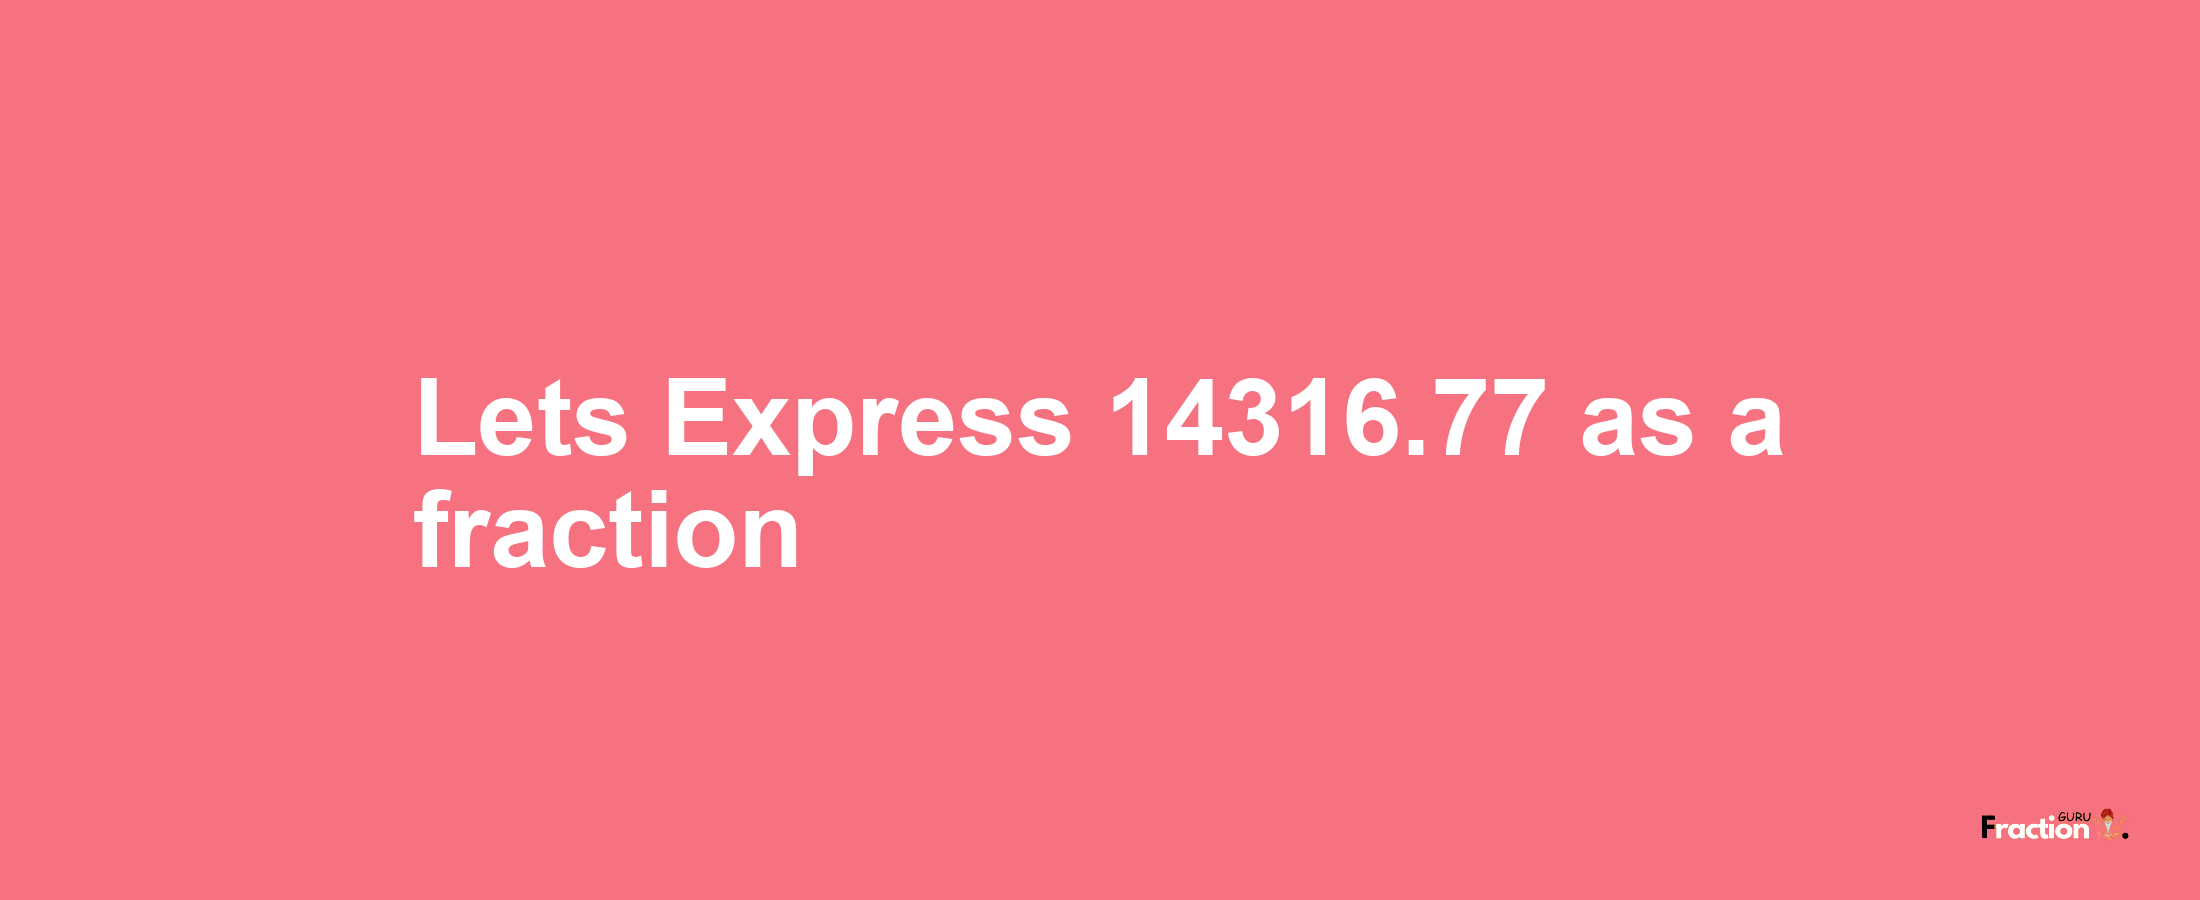 Lets Express 14316.77 as afraction